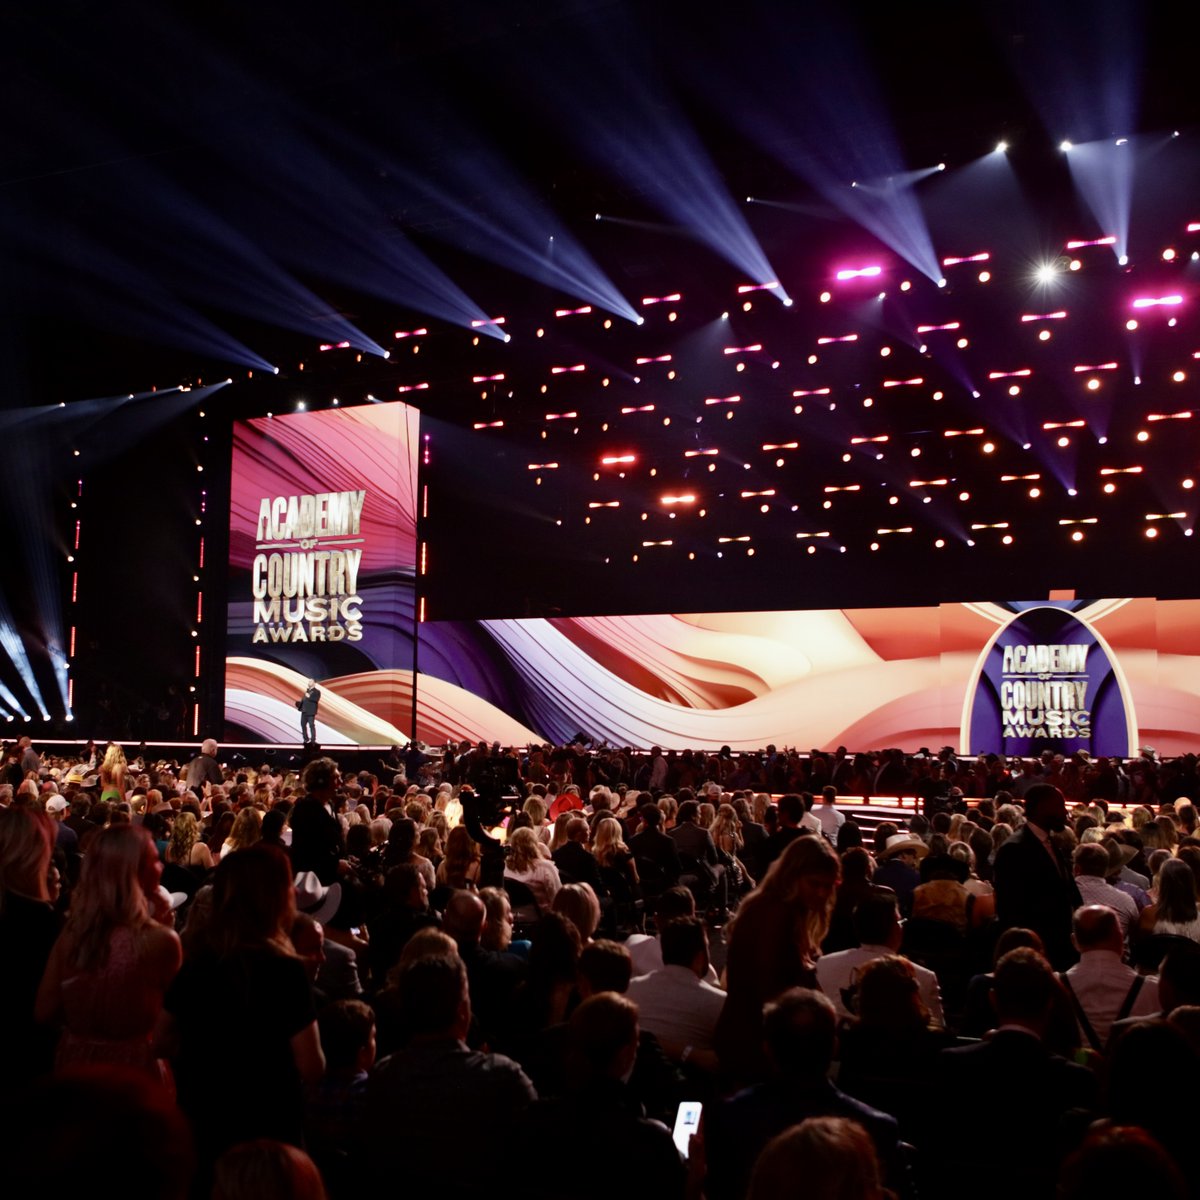 Tickets to Country Music's Party of the Year, right here at #TheStarInFrisco, are ON SALE NOW! 🌟 Stay tuned for epic host, nominee and performer announcements coming very soon. We'll see y'all at the @ACMawards on May 16! 🎟️: bit.ly/3Pesd5M